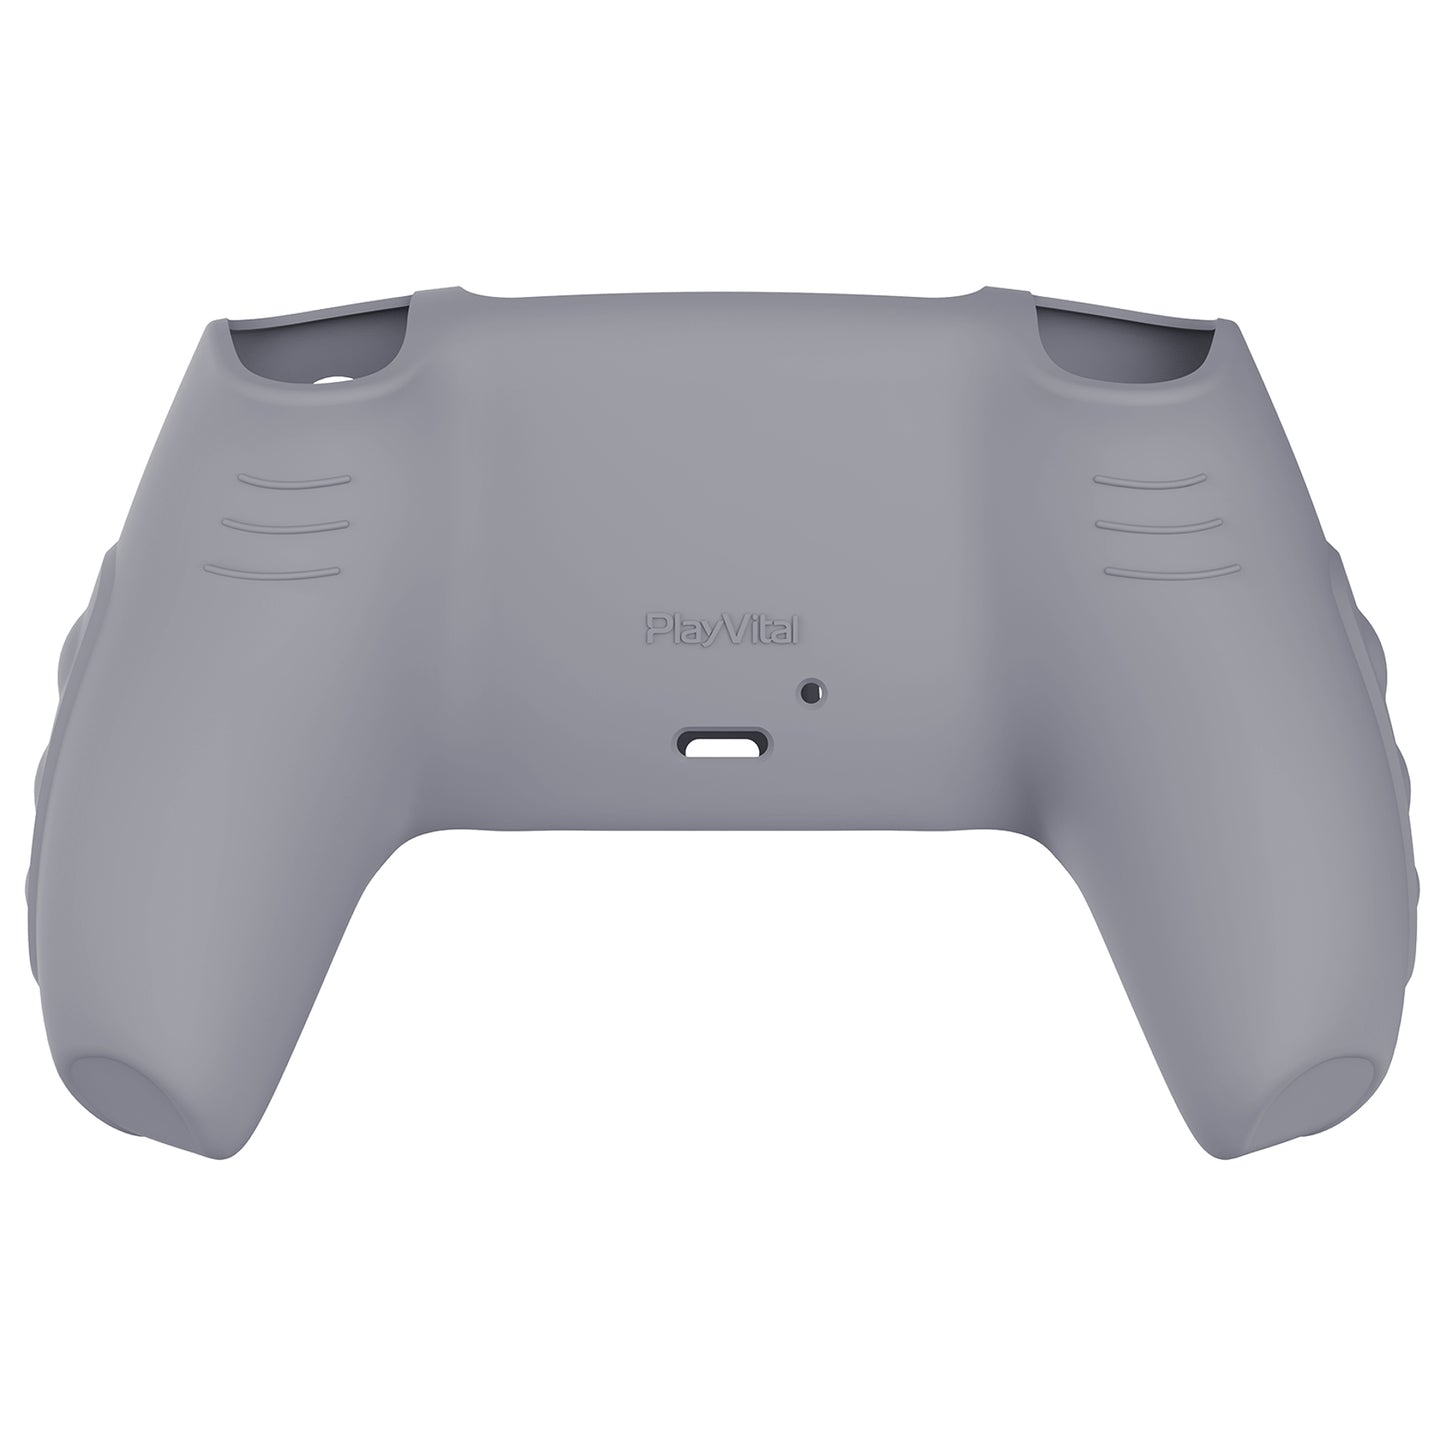 PlayVital Knight Edition Anti-Slip Silicone Cover Skin with Thumb Grip Caps for PS5 Wireless Controller - Metallic Gray & Dark Gray - QSPF011 PlayVital